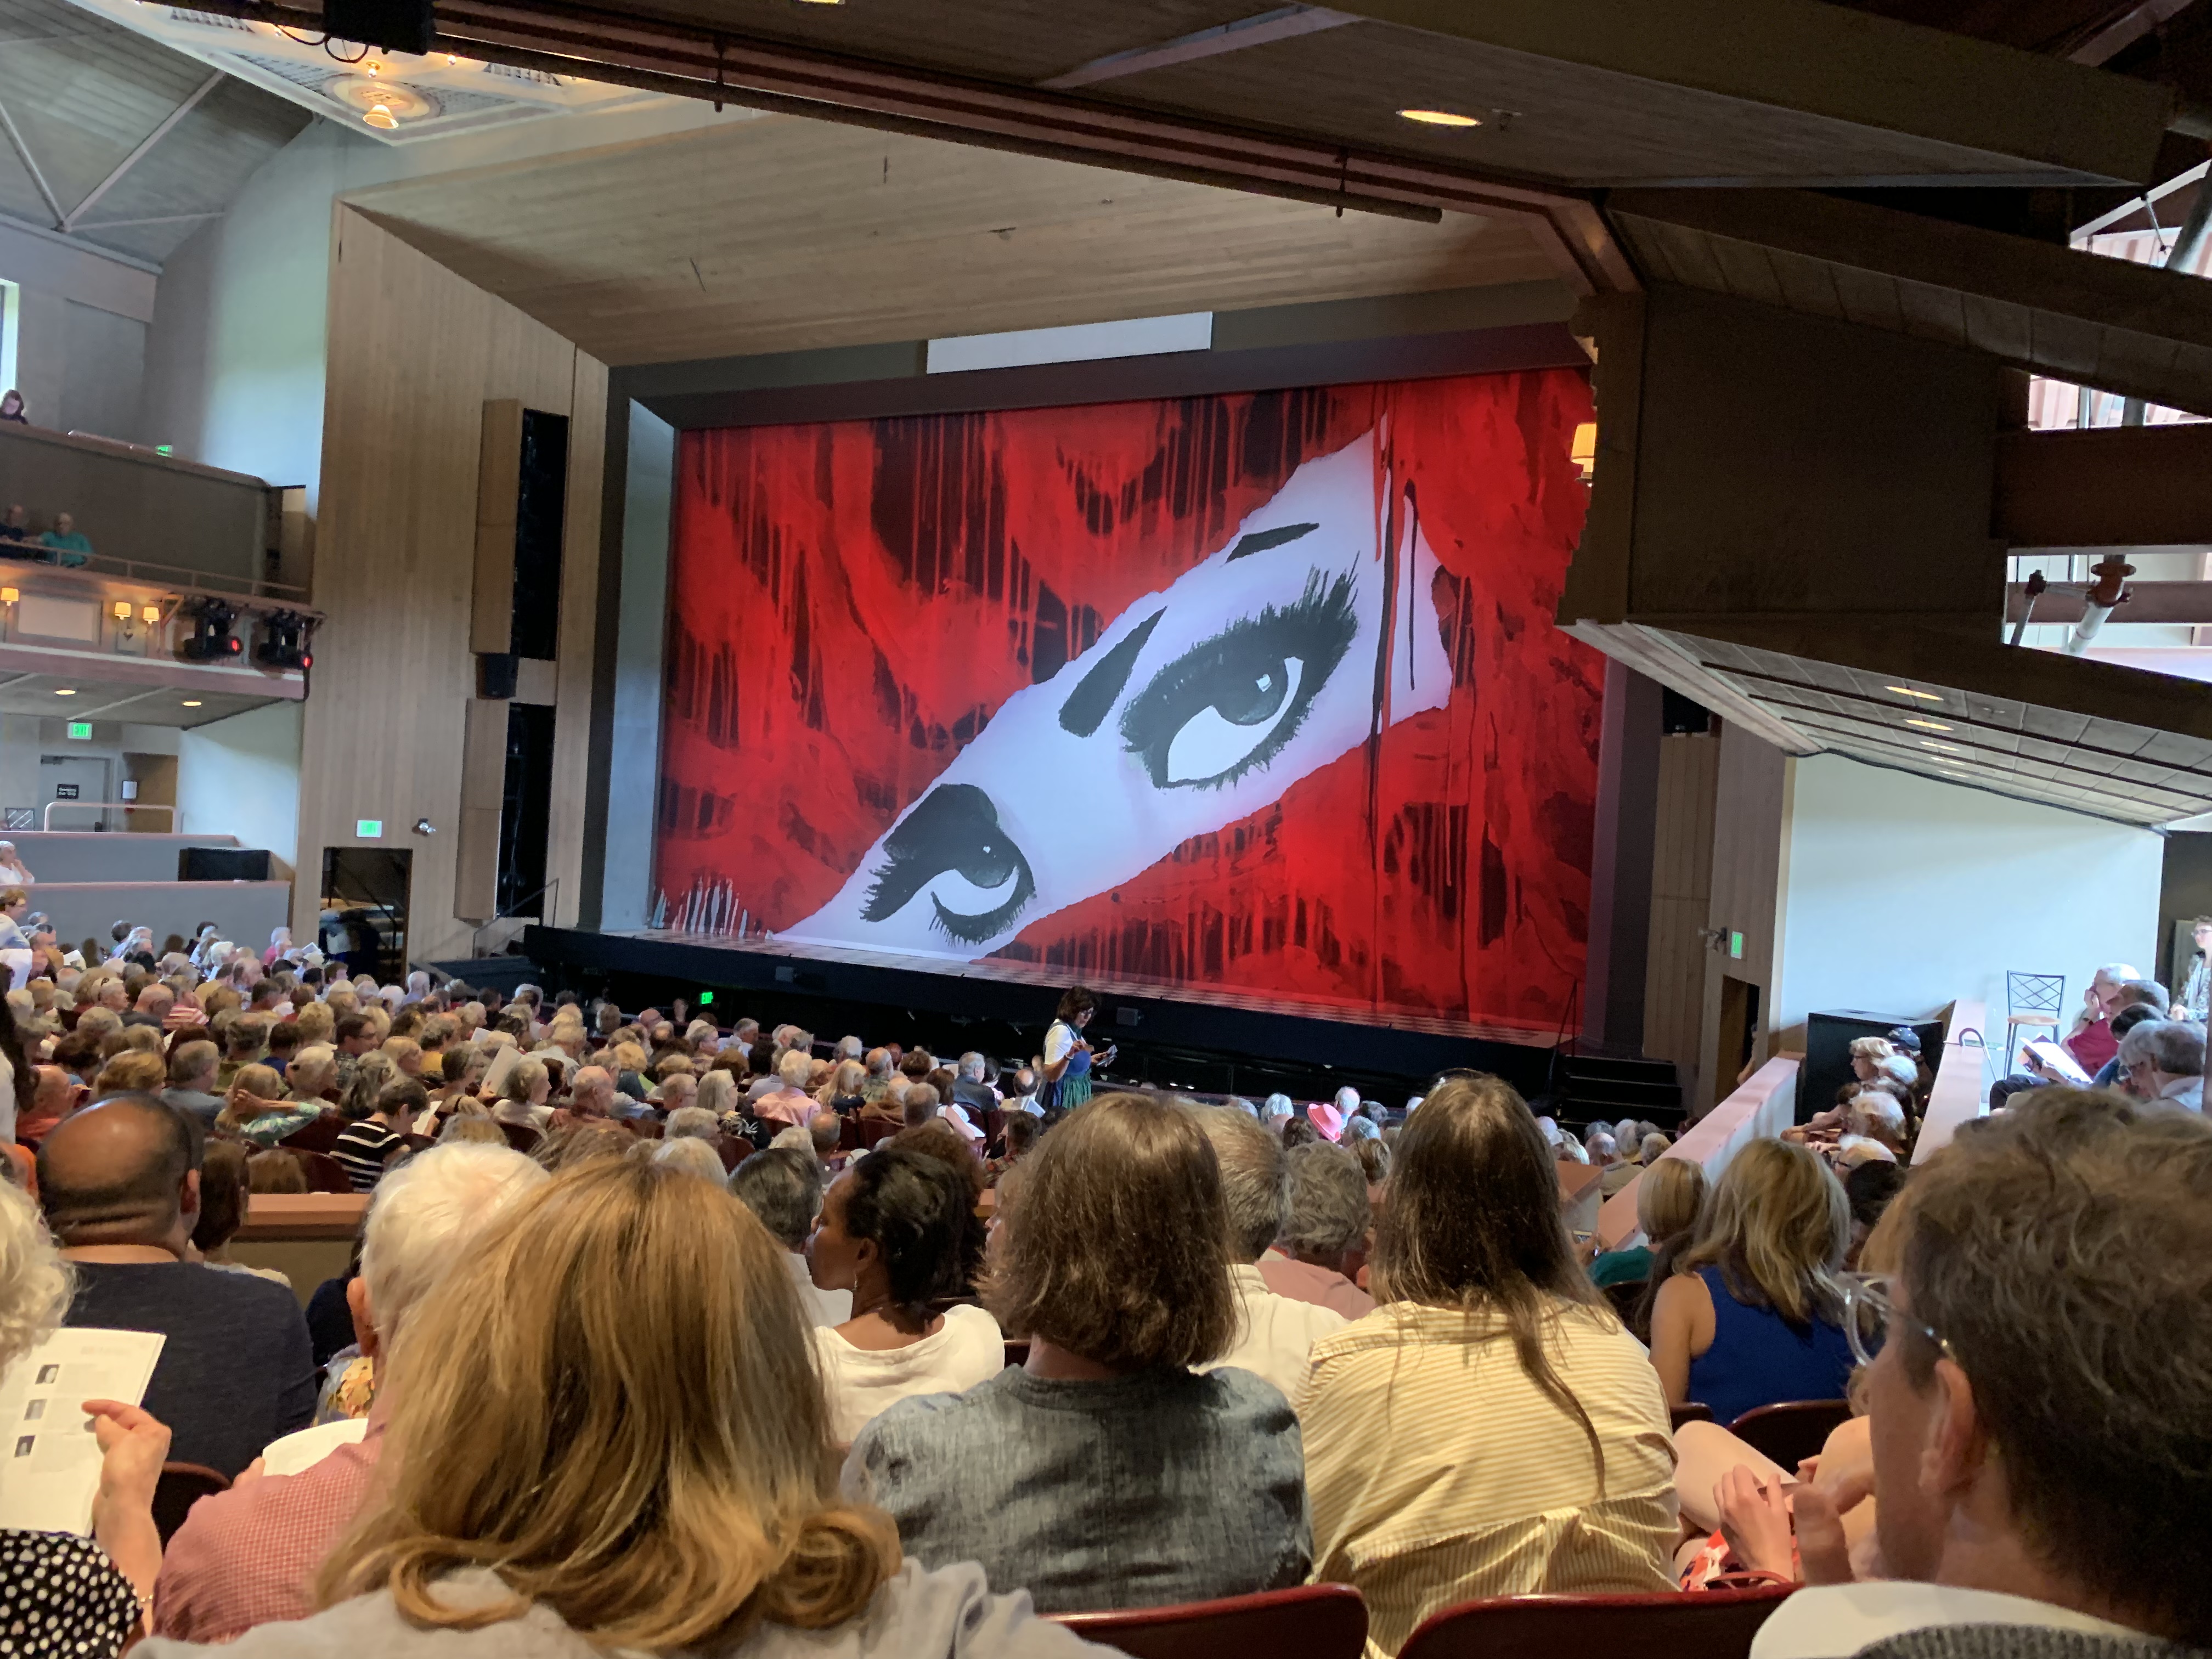 The participants take in a show during the 2019 Glimmerglass Festival.